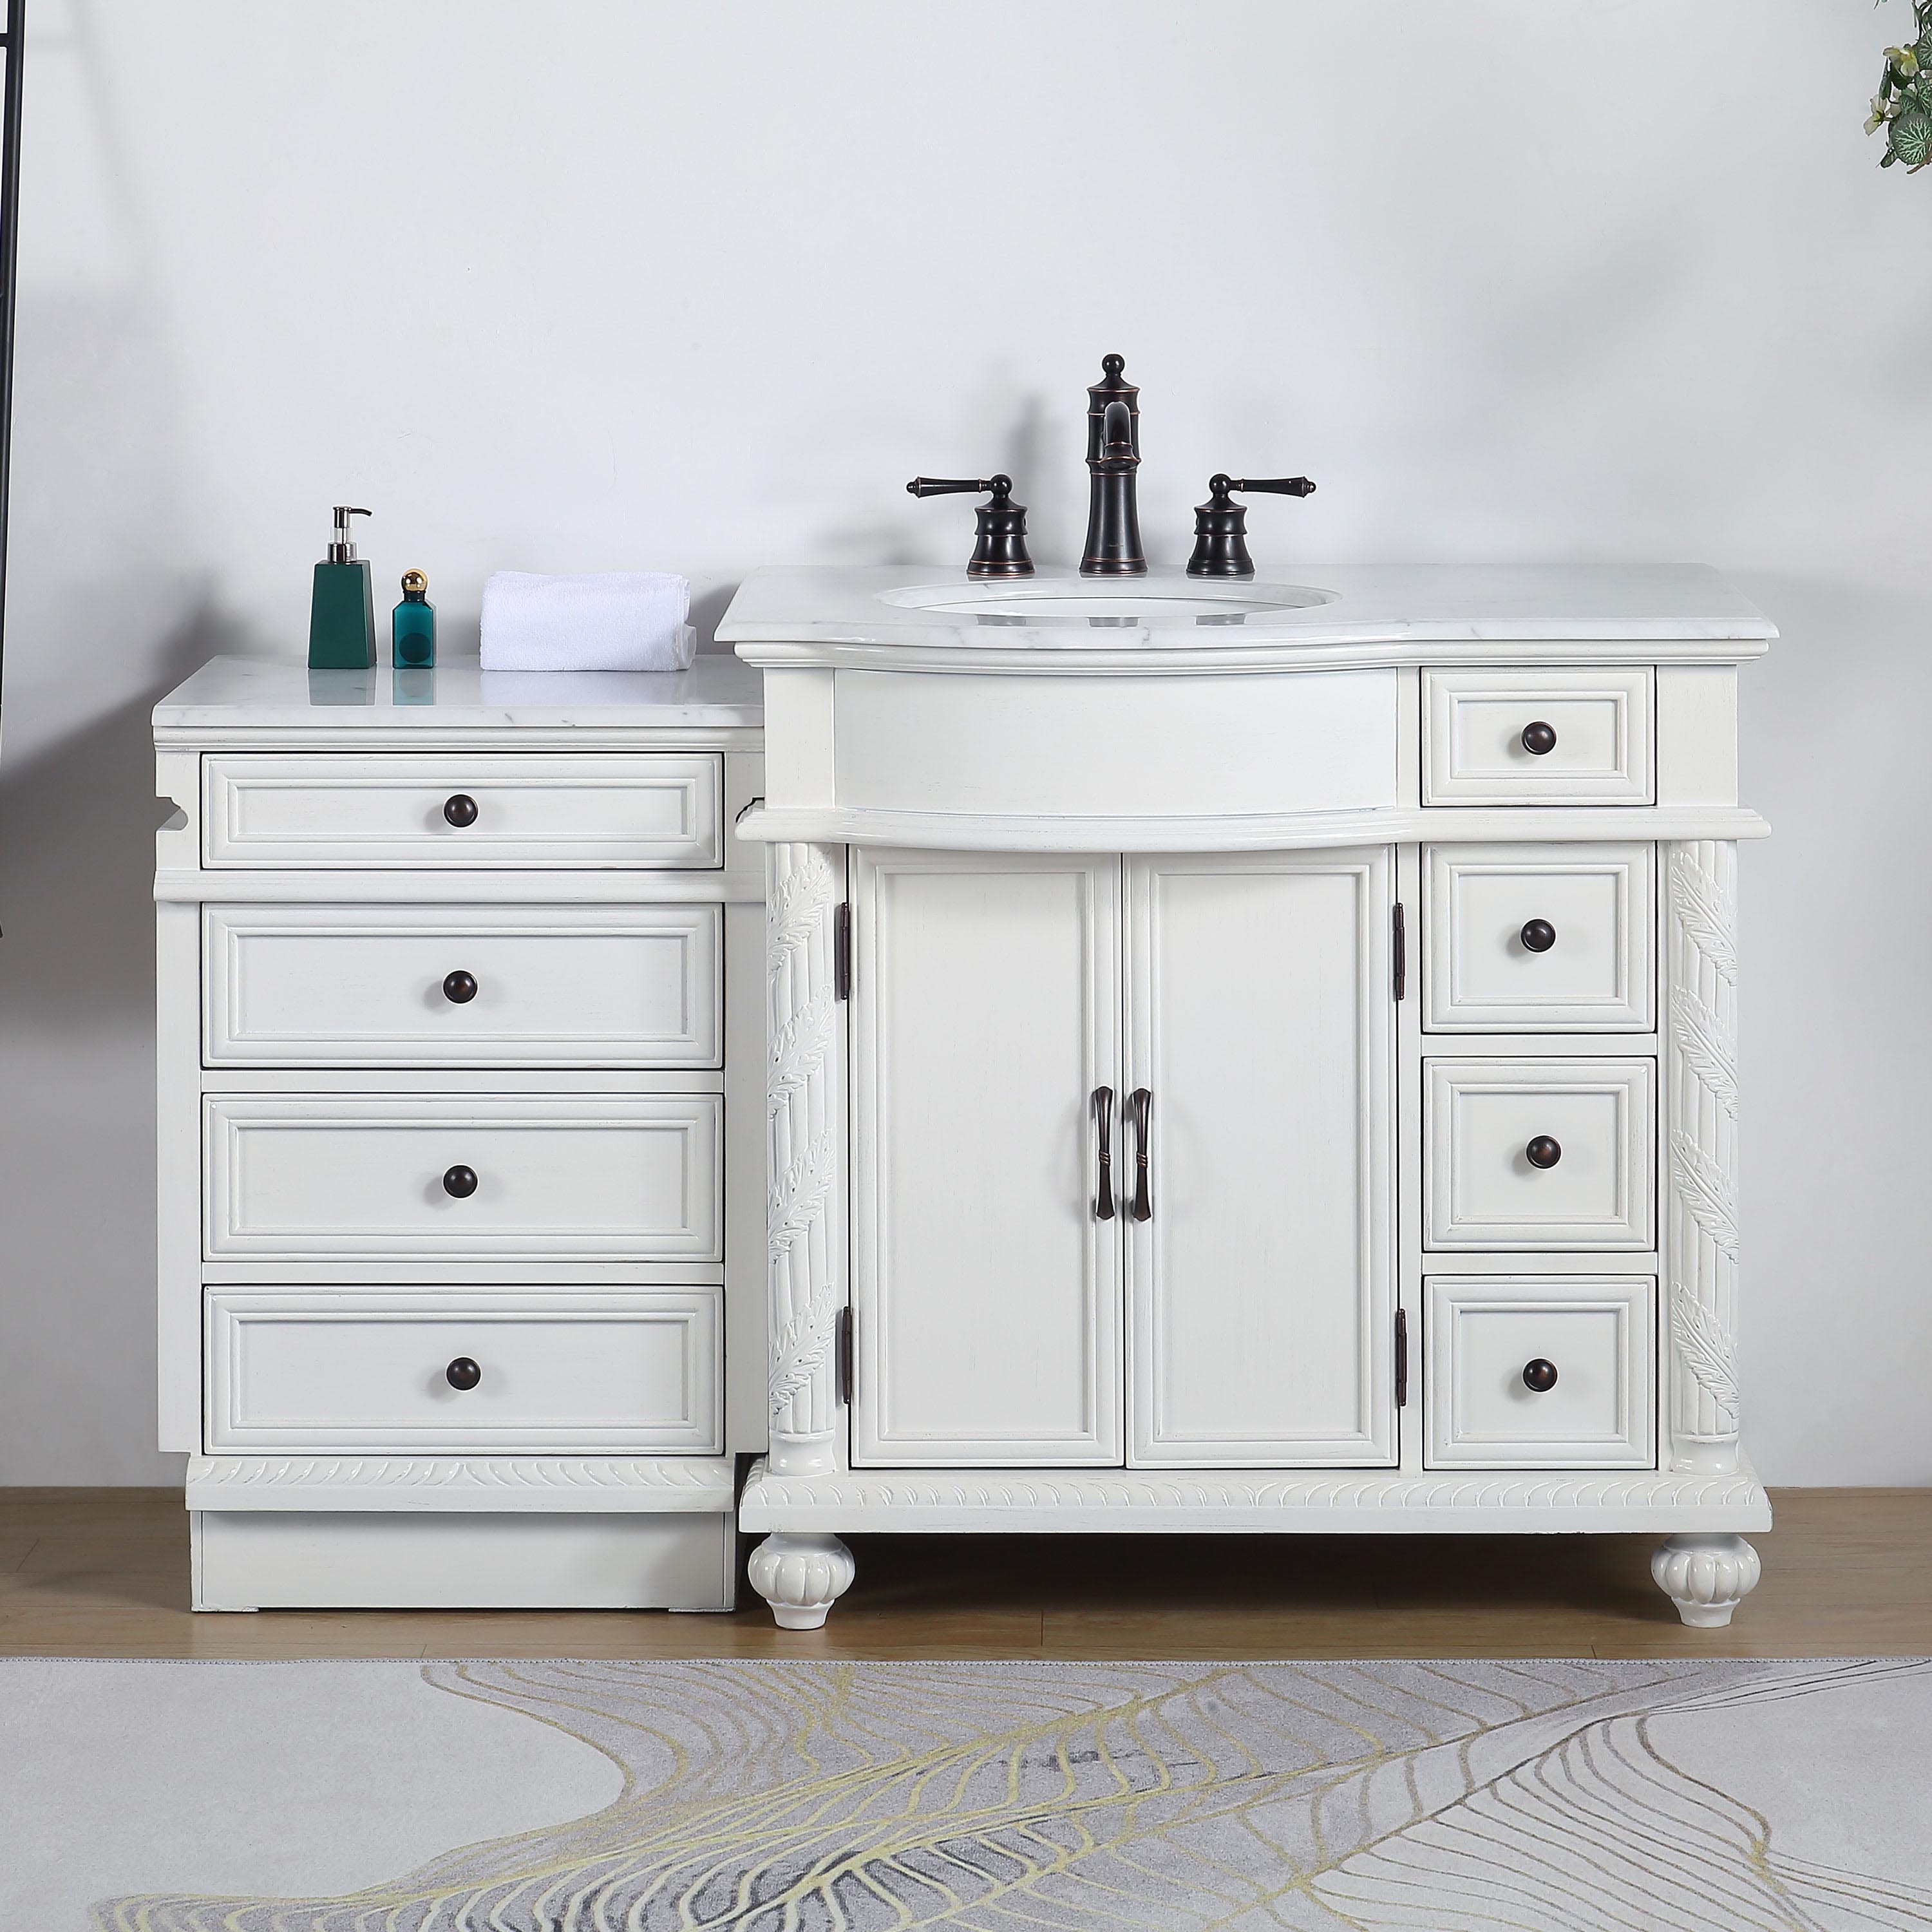 Adelina 56" White Traditional Style Single Sink Bathroom Vanity with White Carrara Marble Countertop